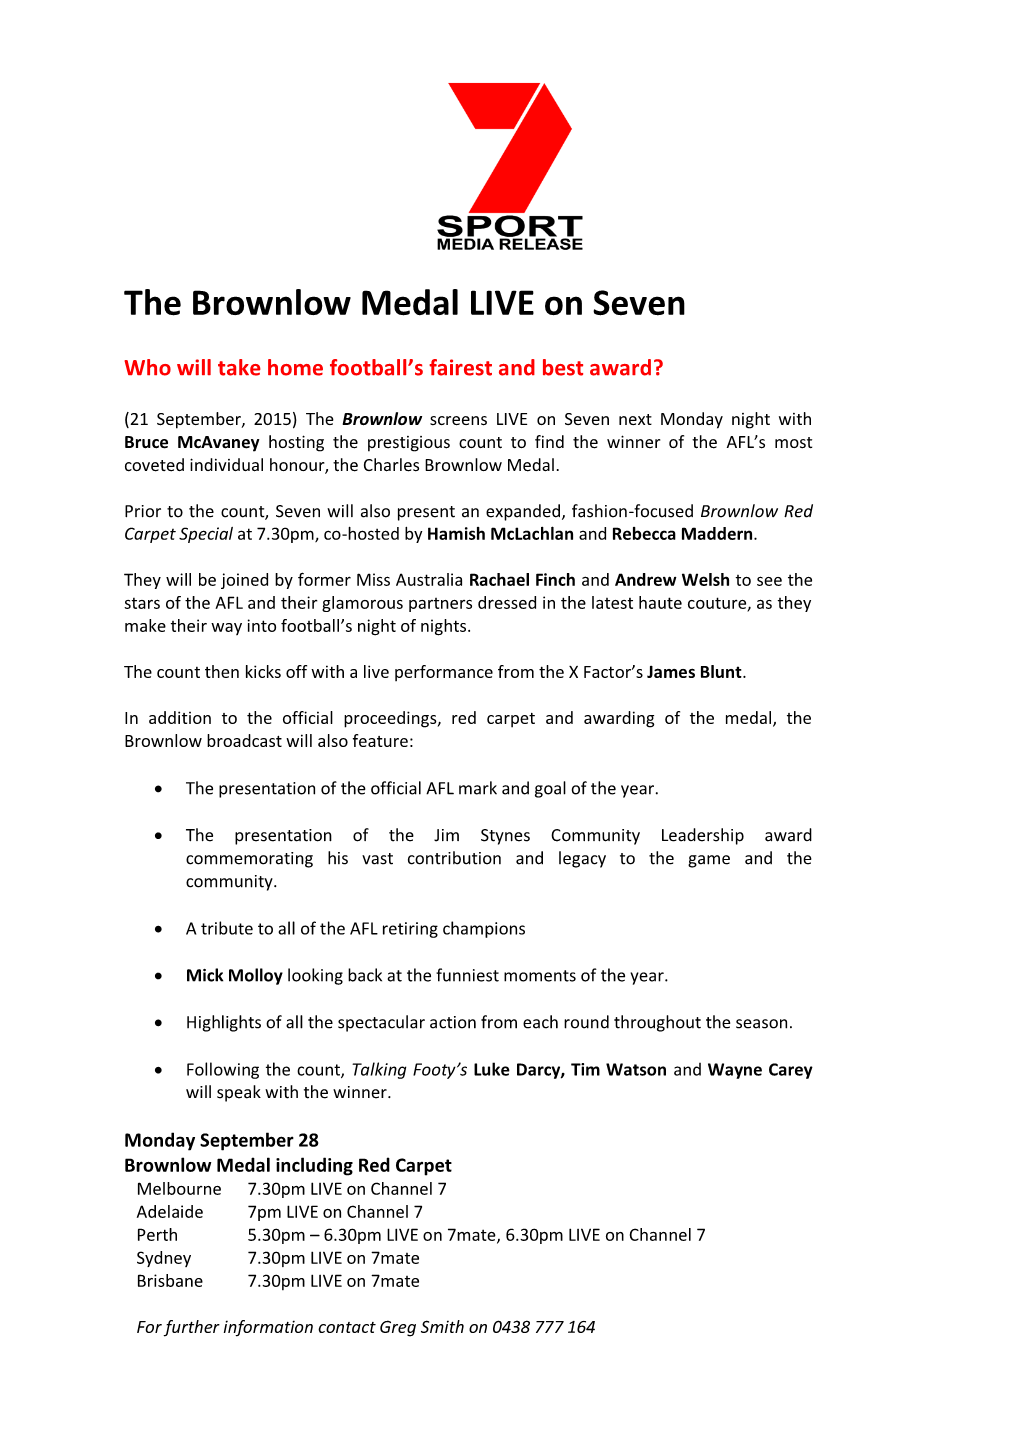 The Brownlow Medal LIVE on Seven